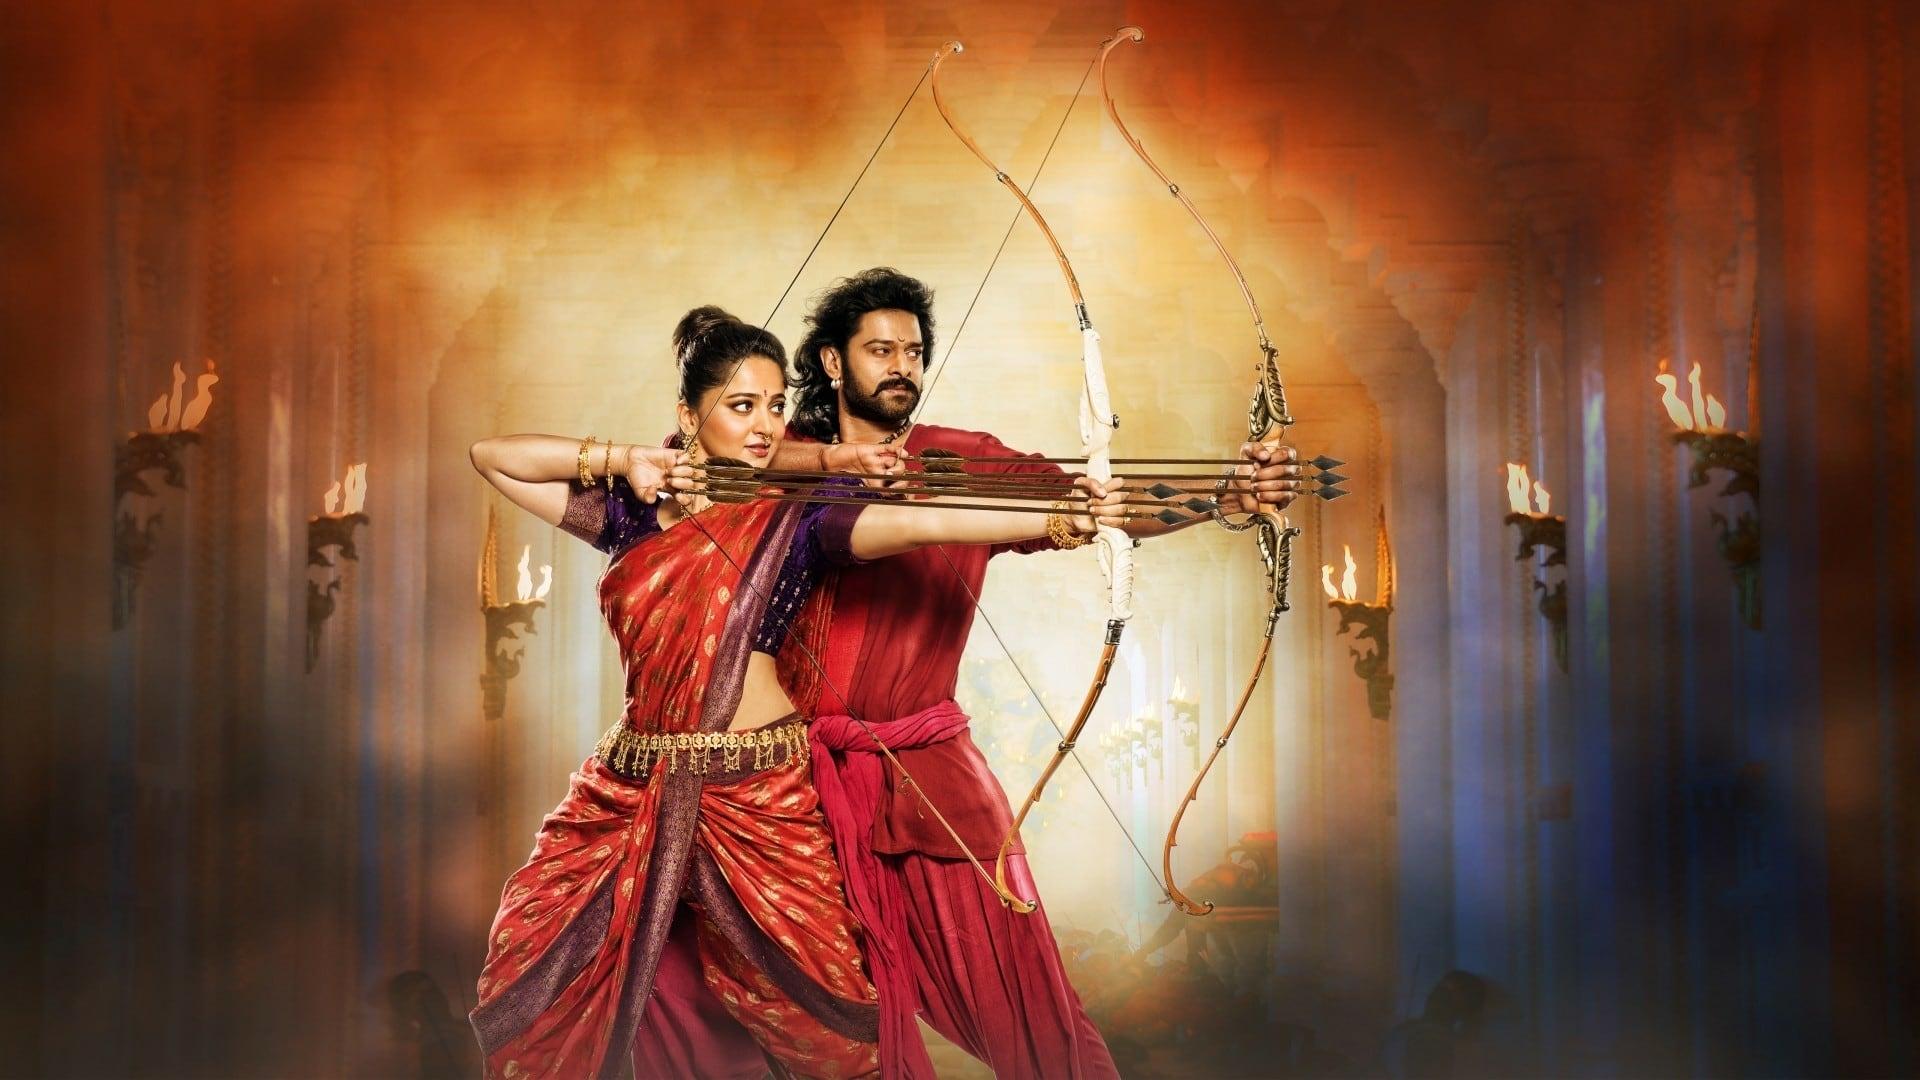 Index of  /var/ezdemo_site/storage/images/asian-voice/volumes/2015/10-october-2015/hindi-version-of-' baahubali'-sets-a-new-record/bahubali-hindi-full-hd-movie-watch -online/305331-1-eng-GB